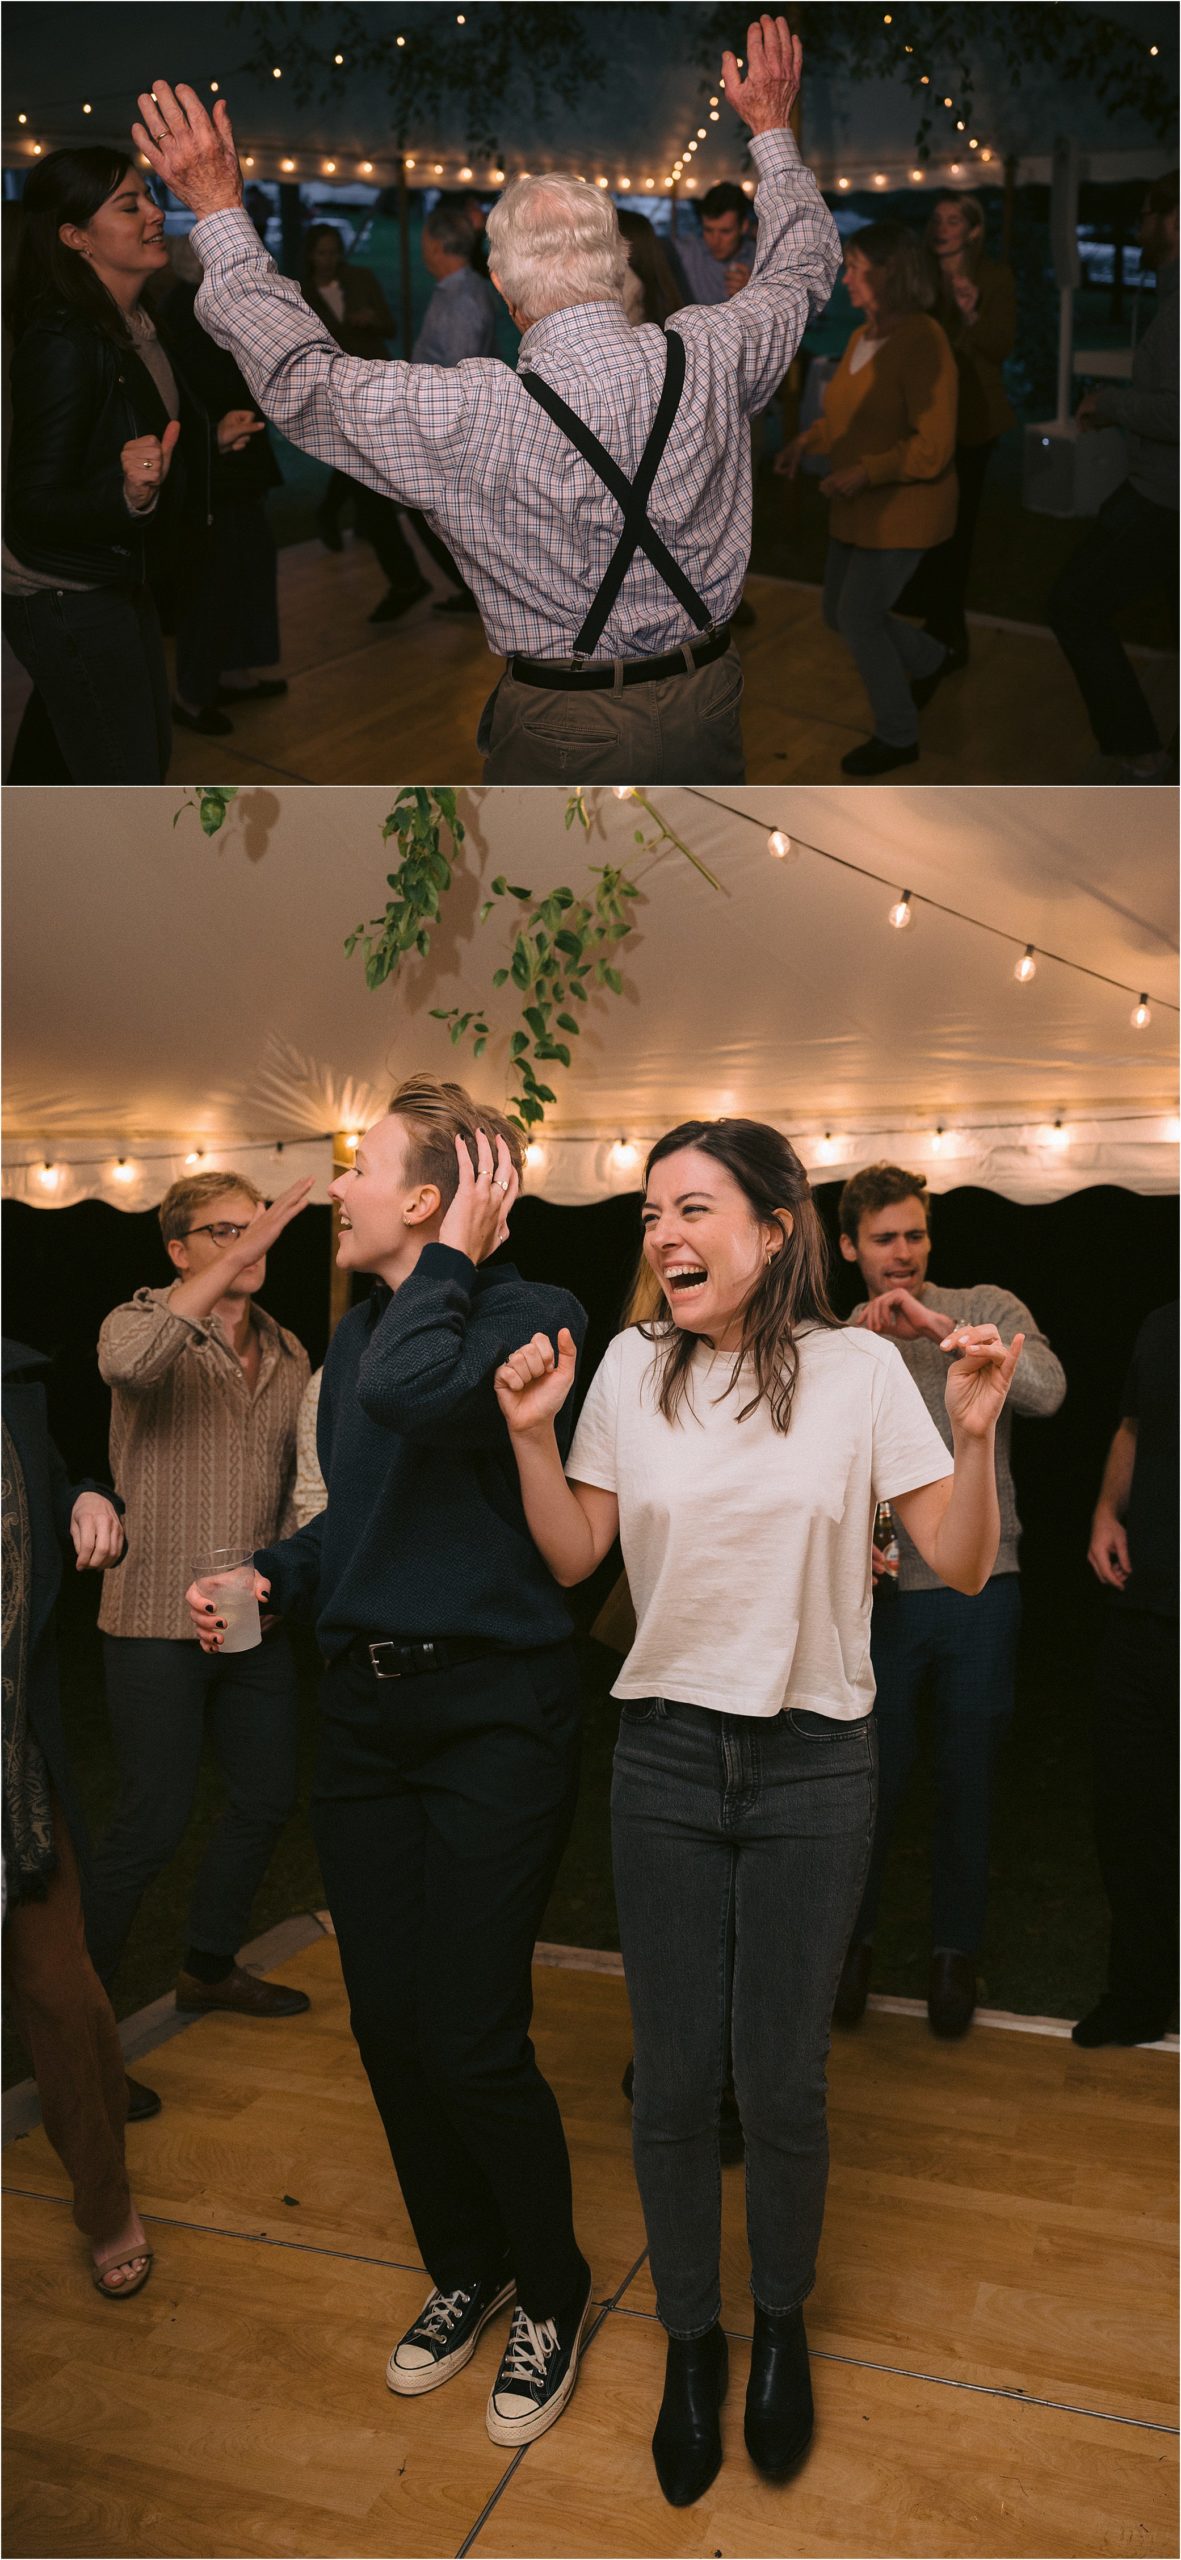 Wedding guests join Lex and Nora on the dance floor of their tent.